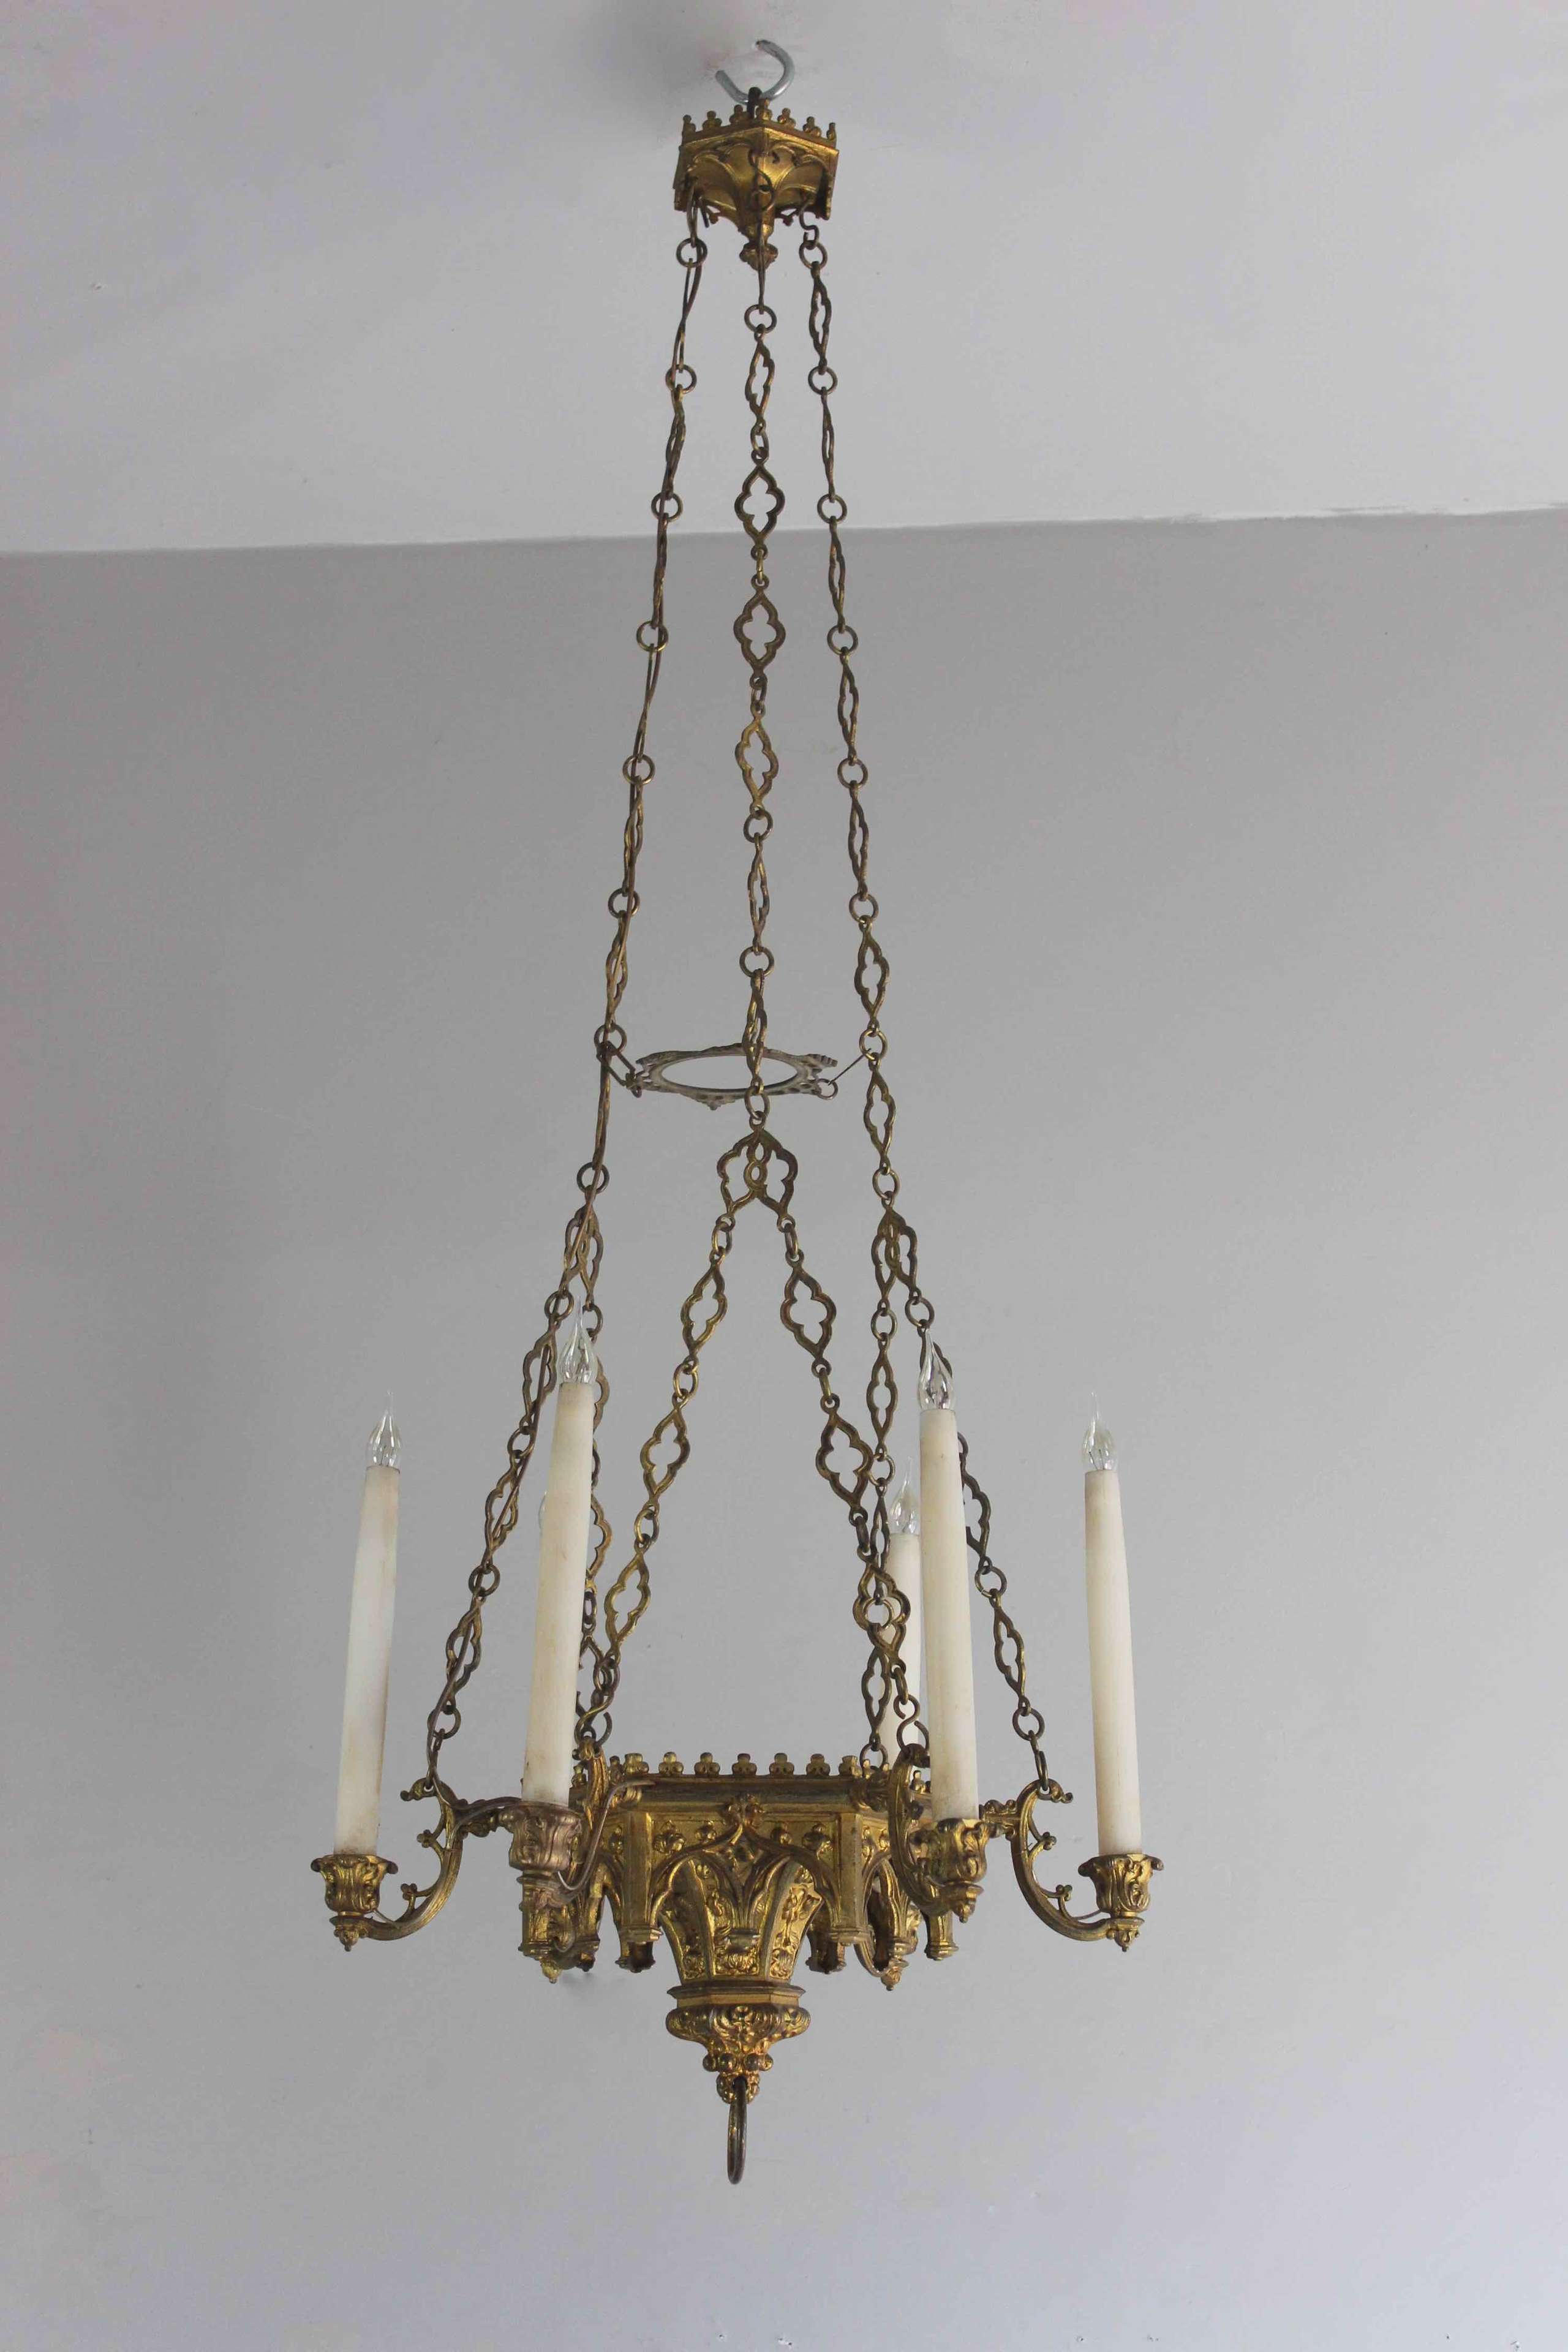 Gothic revival eclesiastical chandelier